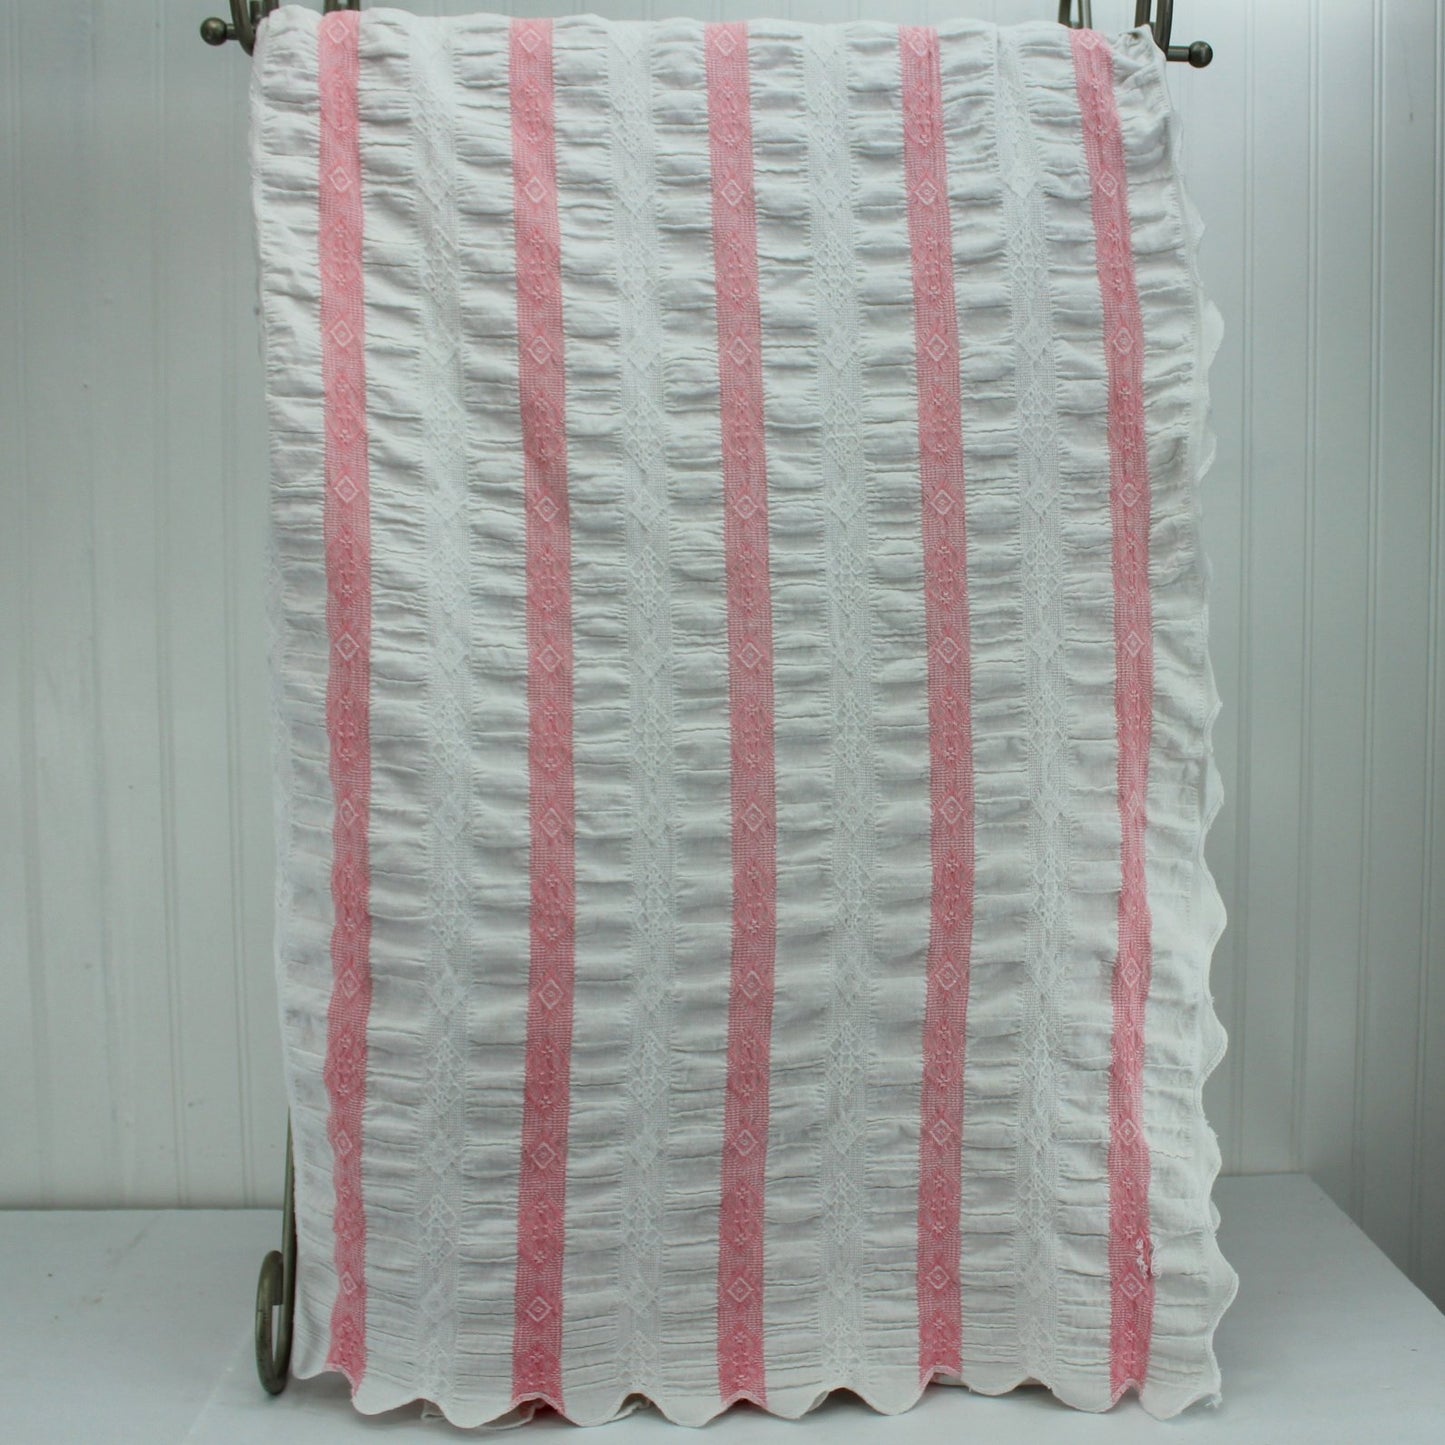 Unusual Ruched Cotton Coverlet Bedspread White Pink Woven Stripe Scalloped Use DIY 1/2 length view 